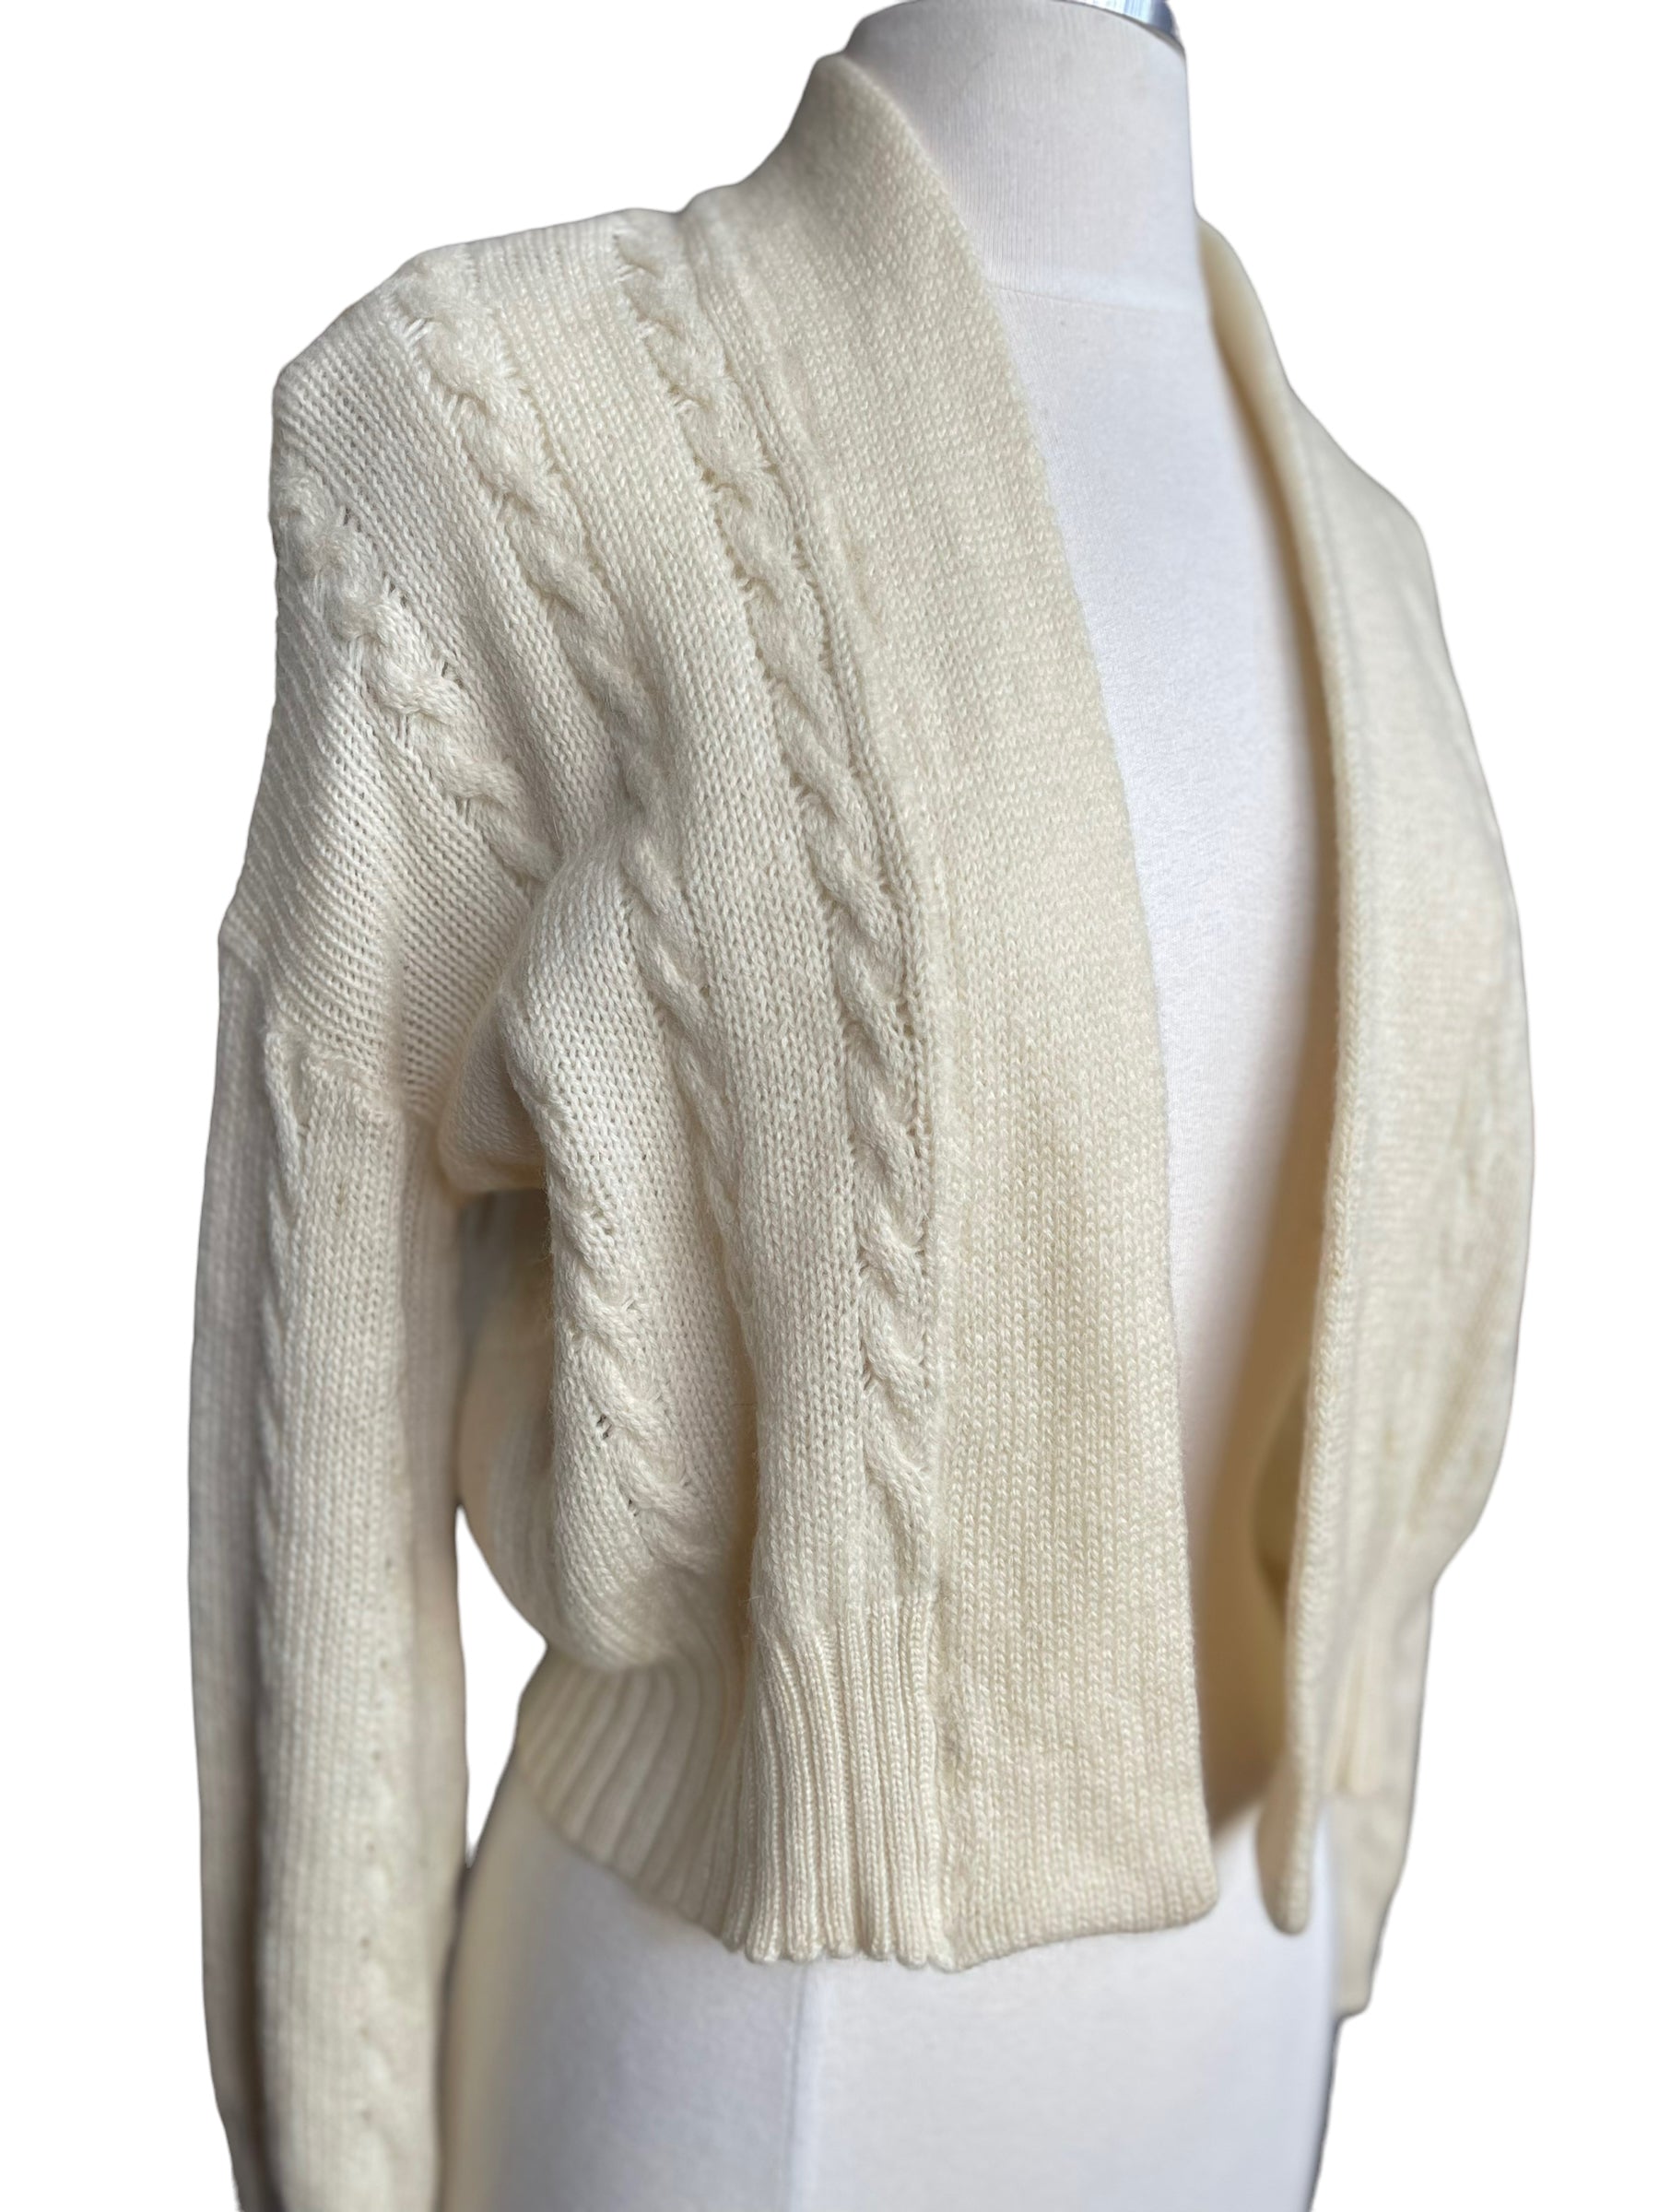 Right front side view of Vintage 1950s Cable Knit Cardigan Sweater | Barn Owl Seattle | Seattle True Vintage